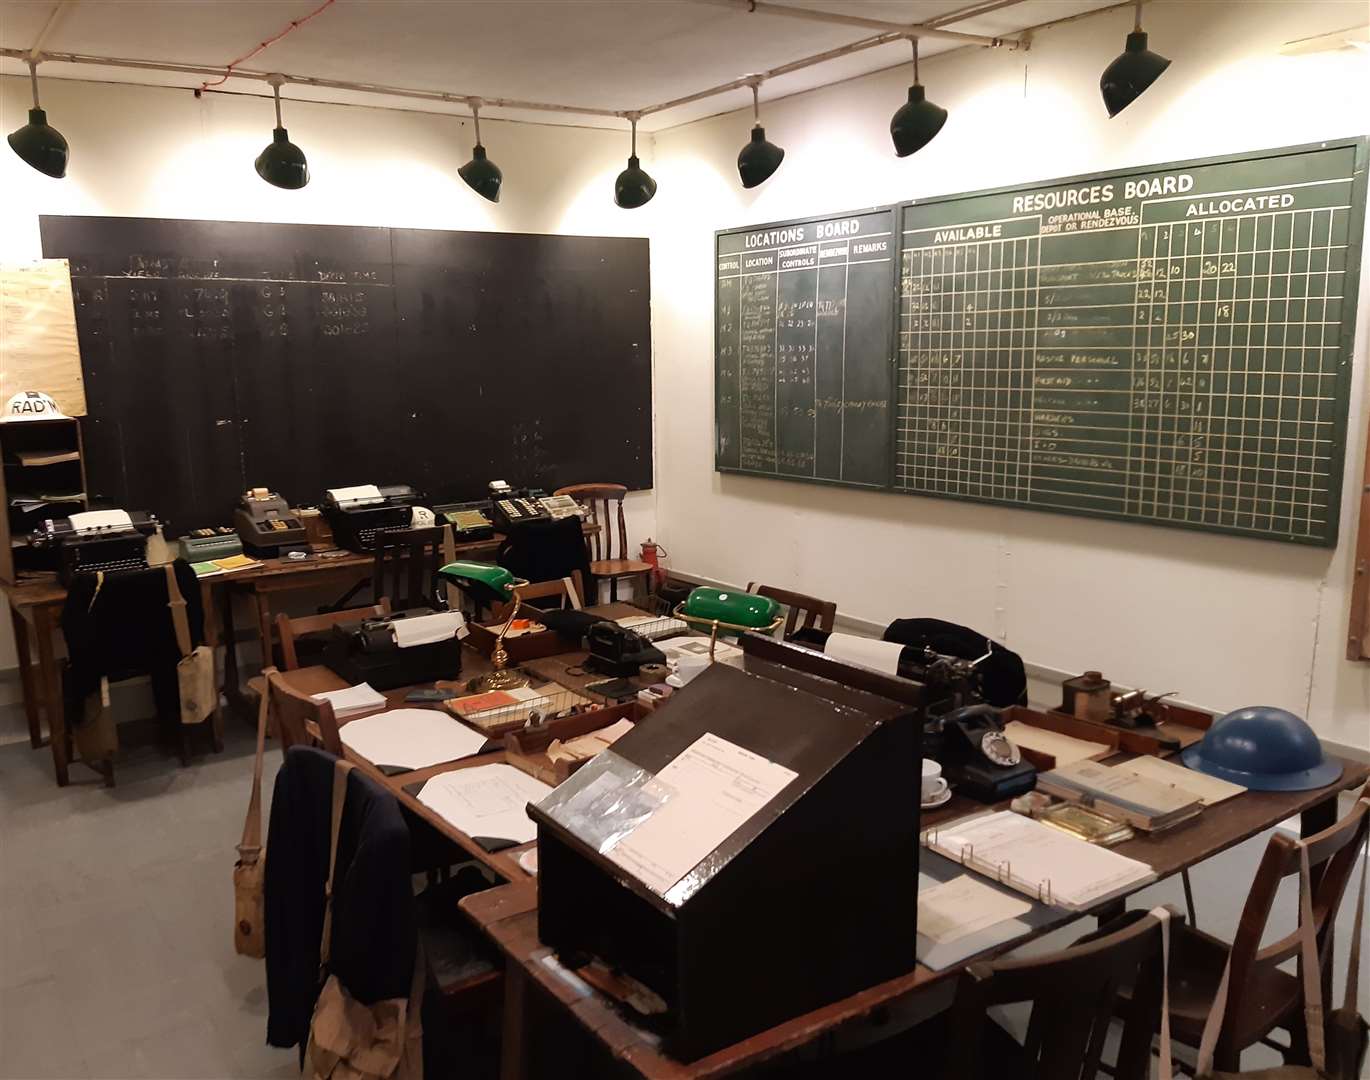 Inside the district control room where tally boards would record the available civil defence resources. Photo: Sean Delaney